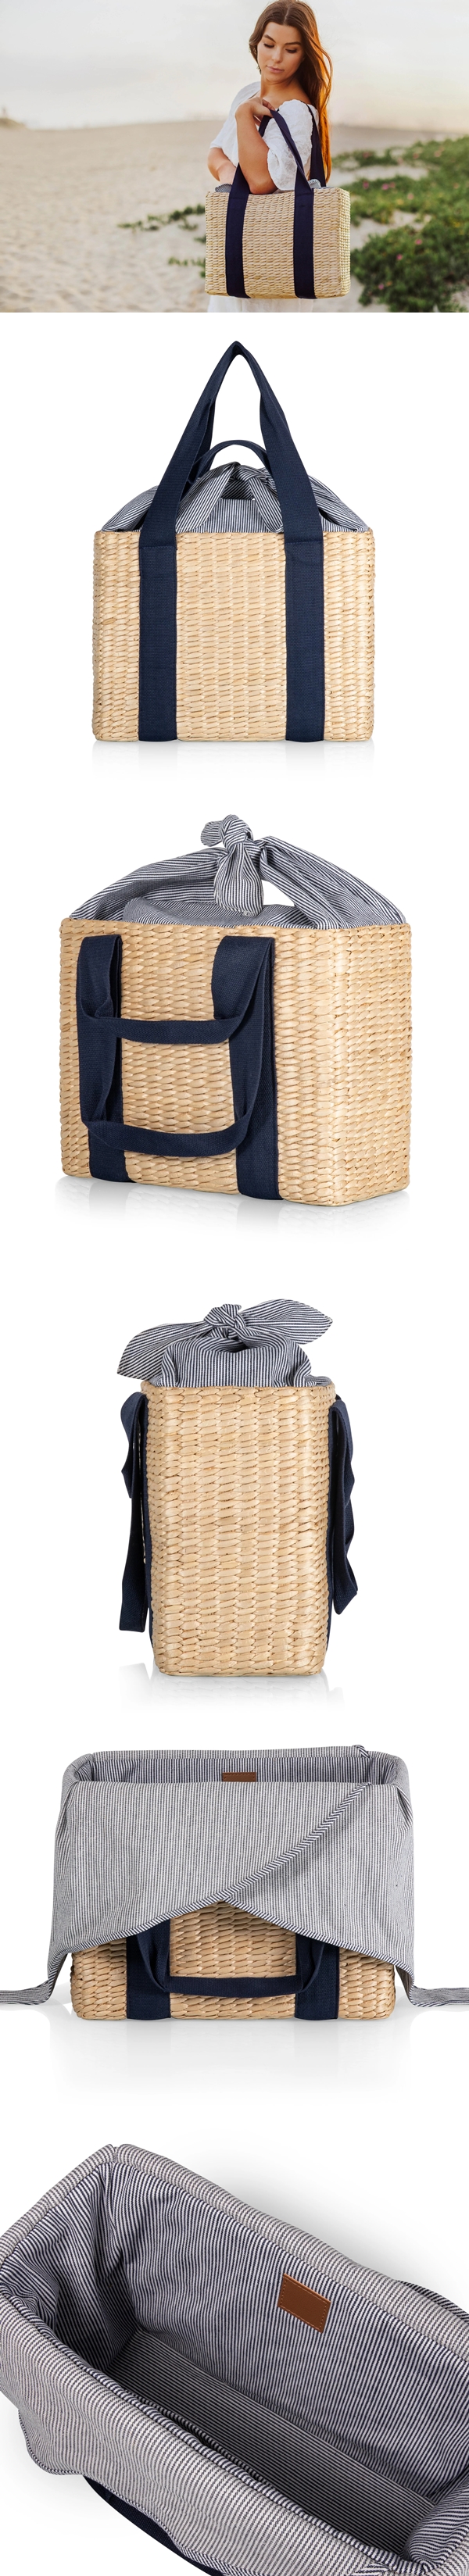 Woven-Seagrass Parisian Picnic Basket with Blue-Ticking Fabric Closure